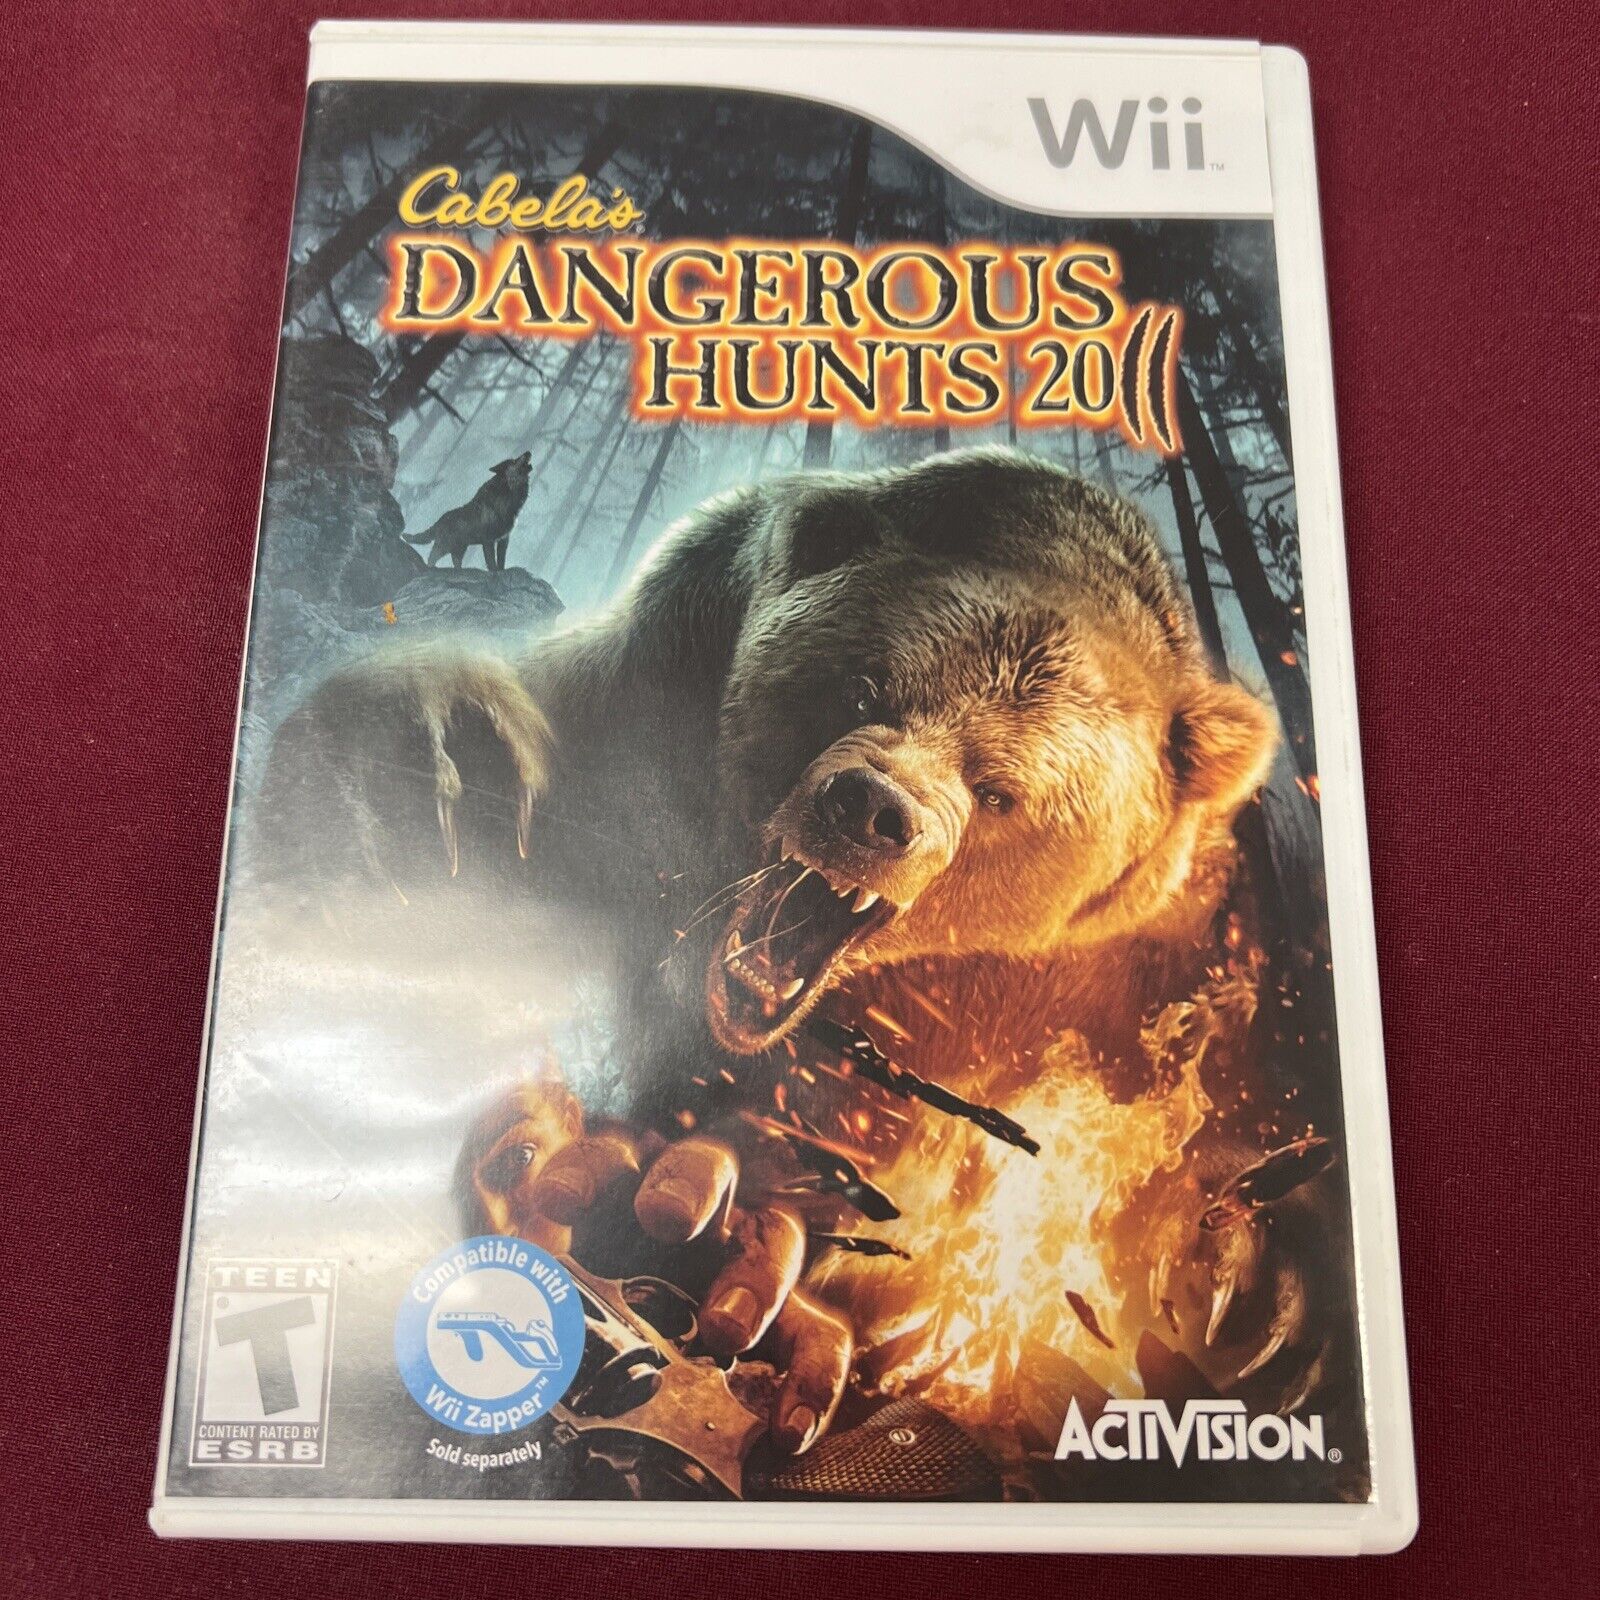 Cabela's Dangerous Hunts Special Edition 2011 Wii Game with Manual Preowned